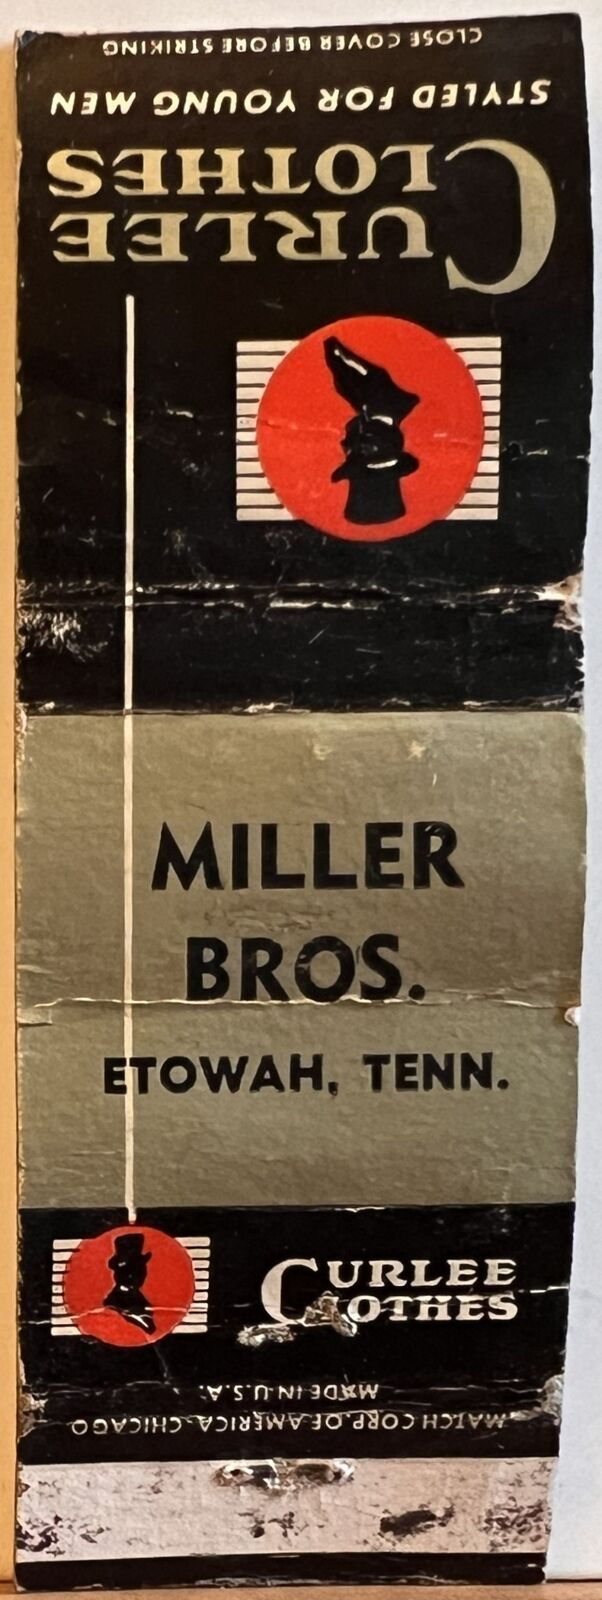 Miller Bros Etowah TN Tennessee Curlee Clothes Vintage Matchbook Cover